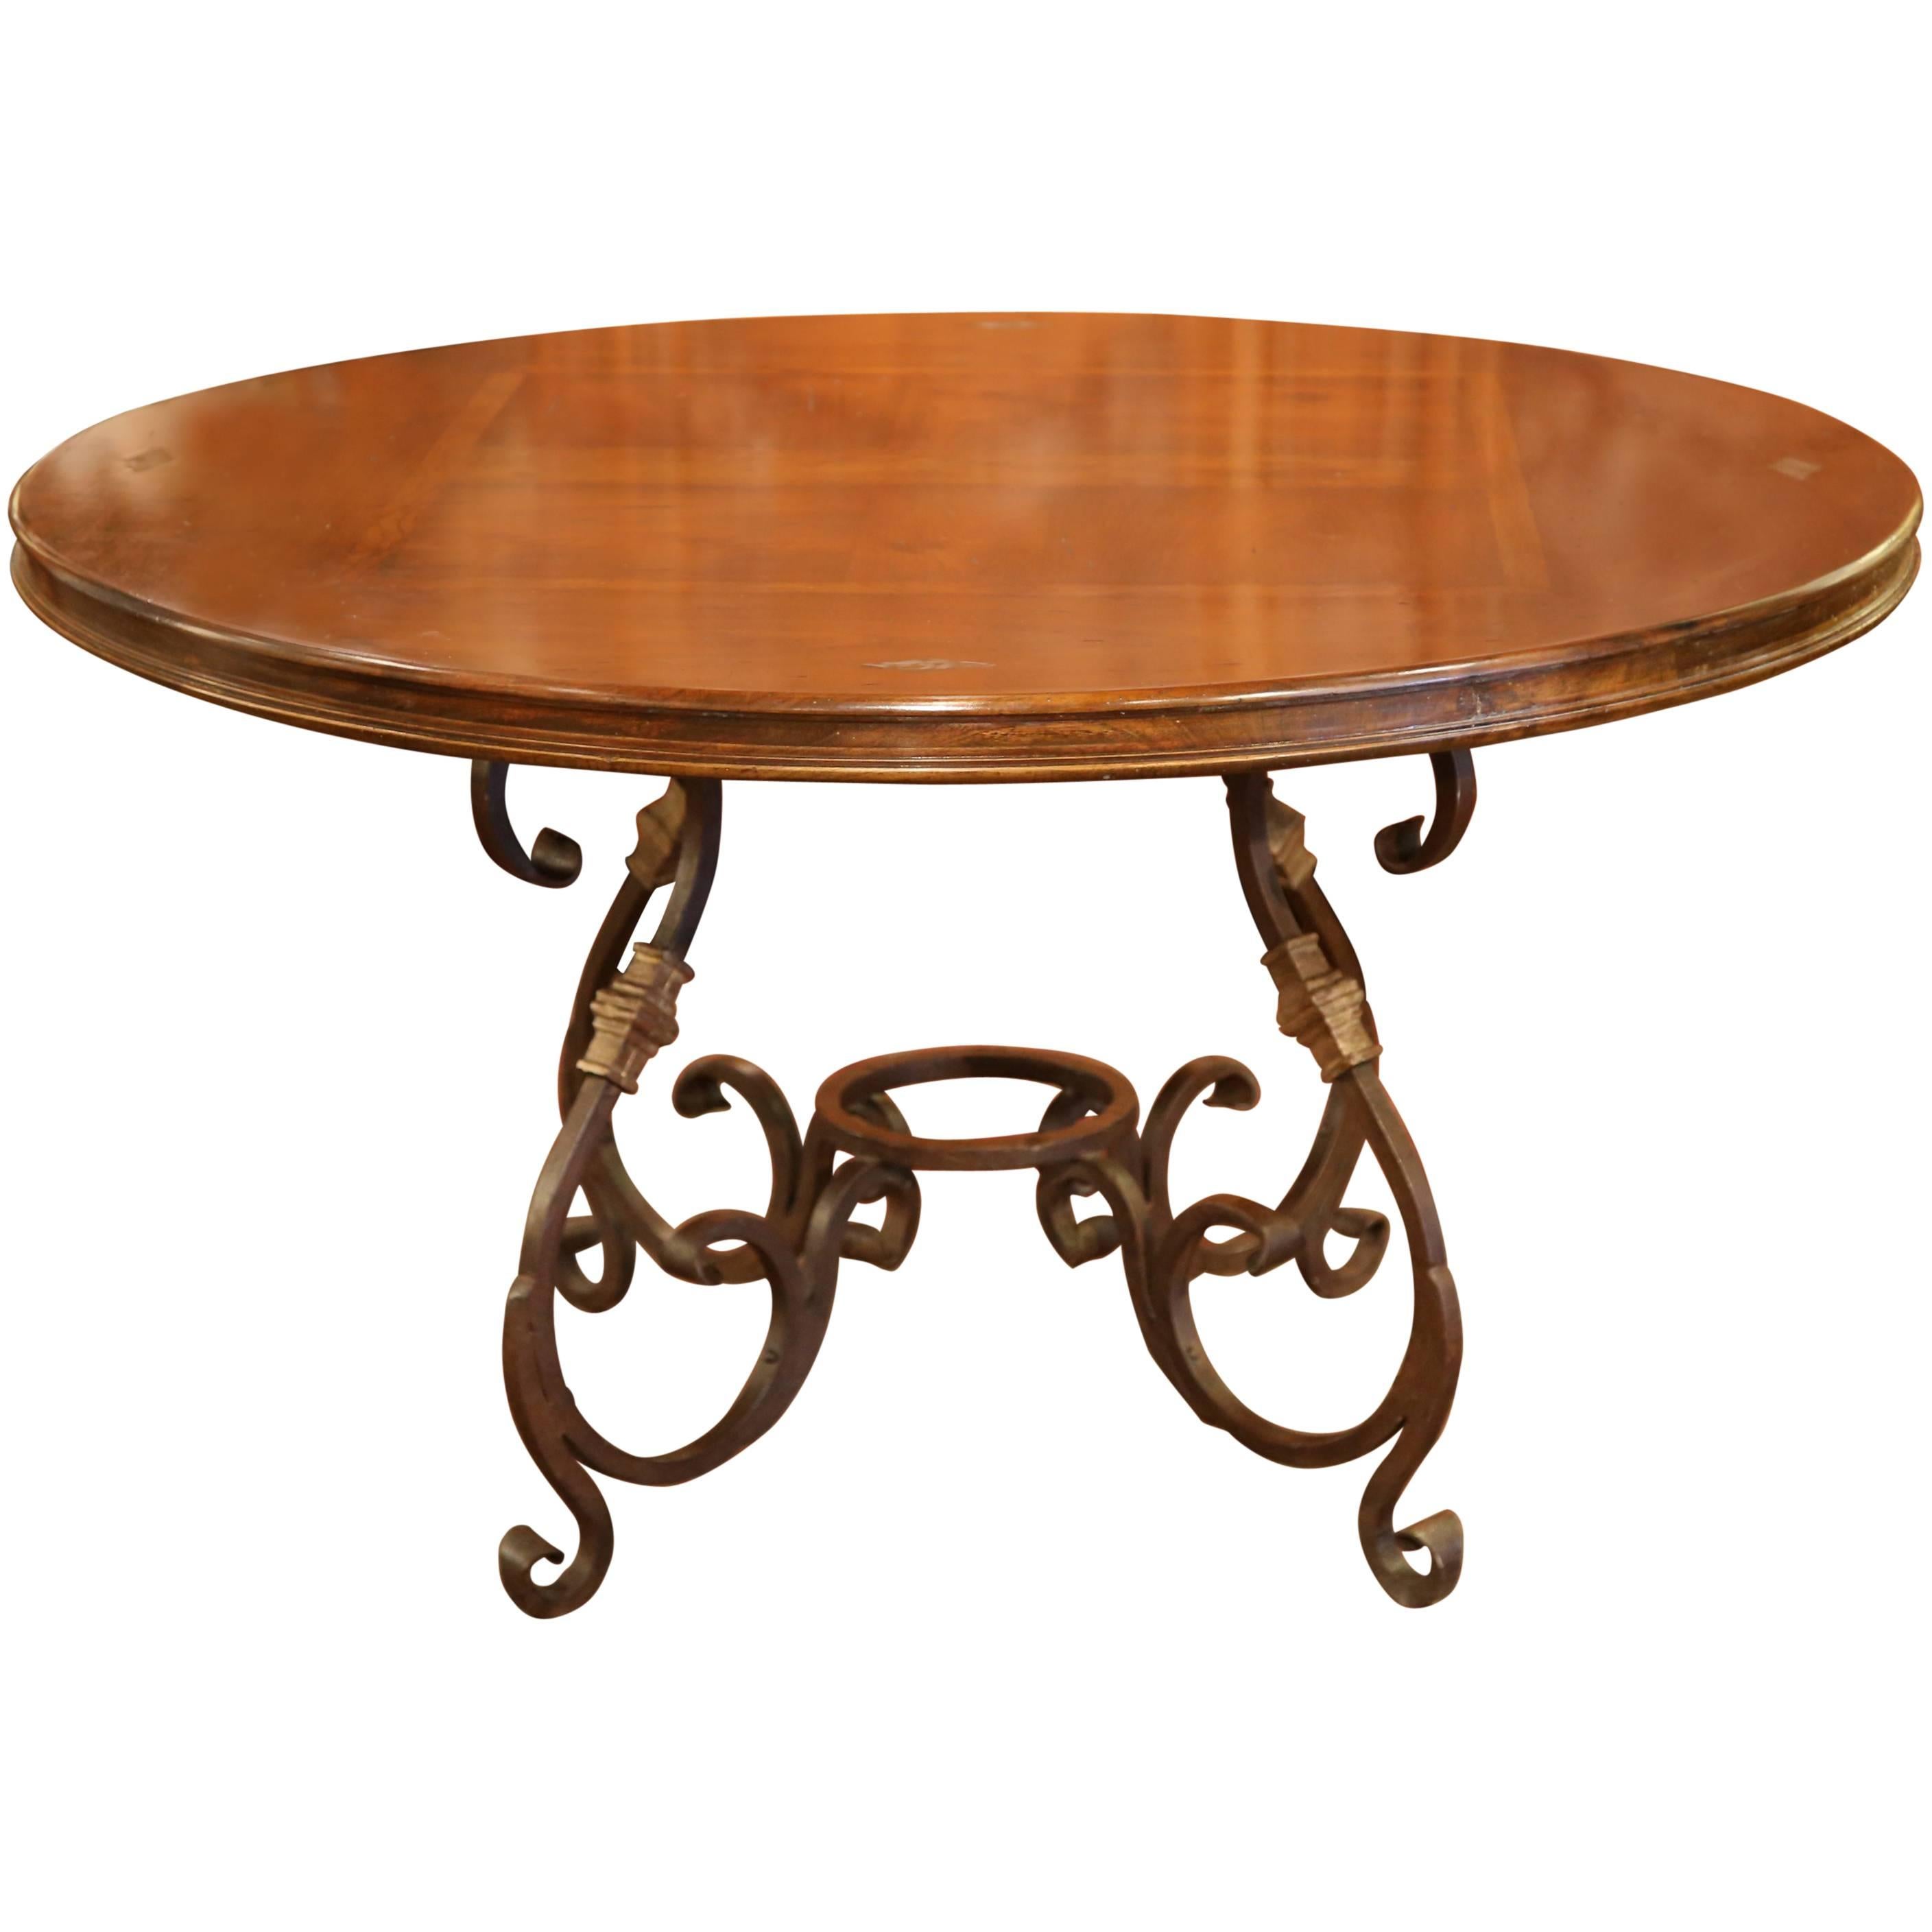 French Round Table with Heavy Wrought Iron Base and Walnut Parquet Top